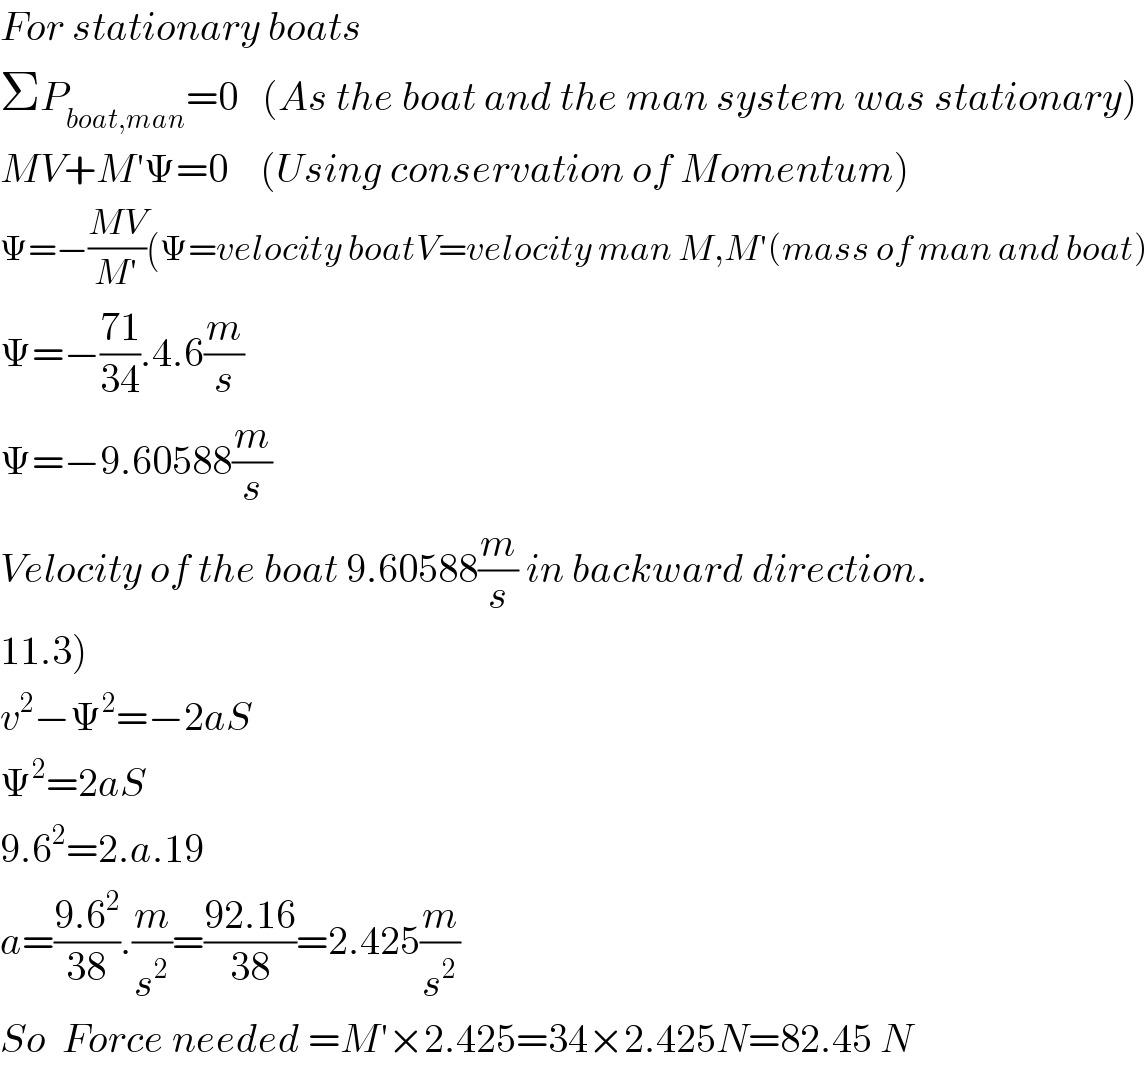 For stationary boats   ΣP_(boat,man) =0   (As the boat and the man system was stationary)  MV+M′Ψ=0    (Using conservation of Momentum)  Ψ=−((MV)/(M′))(Ψ=velocity boatV=velocity man M,M′(mass of man and boat)  Ψ=−((71)/(34)).4.6(m/s)  Ψ=−9.60588(m/s)  Velocity of the boat 9.60588(m/s) in backward direction.  11.3)  v^2 −Ψ^2 =−2aS  Ψ^2 =2aS  9.6^2 =2.a.19  a=((9.6^2 )/(38)).(m/s^2 )=((92.16)/(38))=2.425(m/s^2 )  So  Force needed =M′×2.425=34×2.425N=82.45 N  